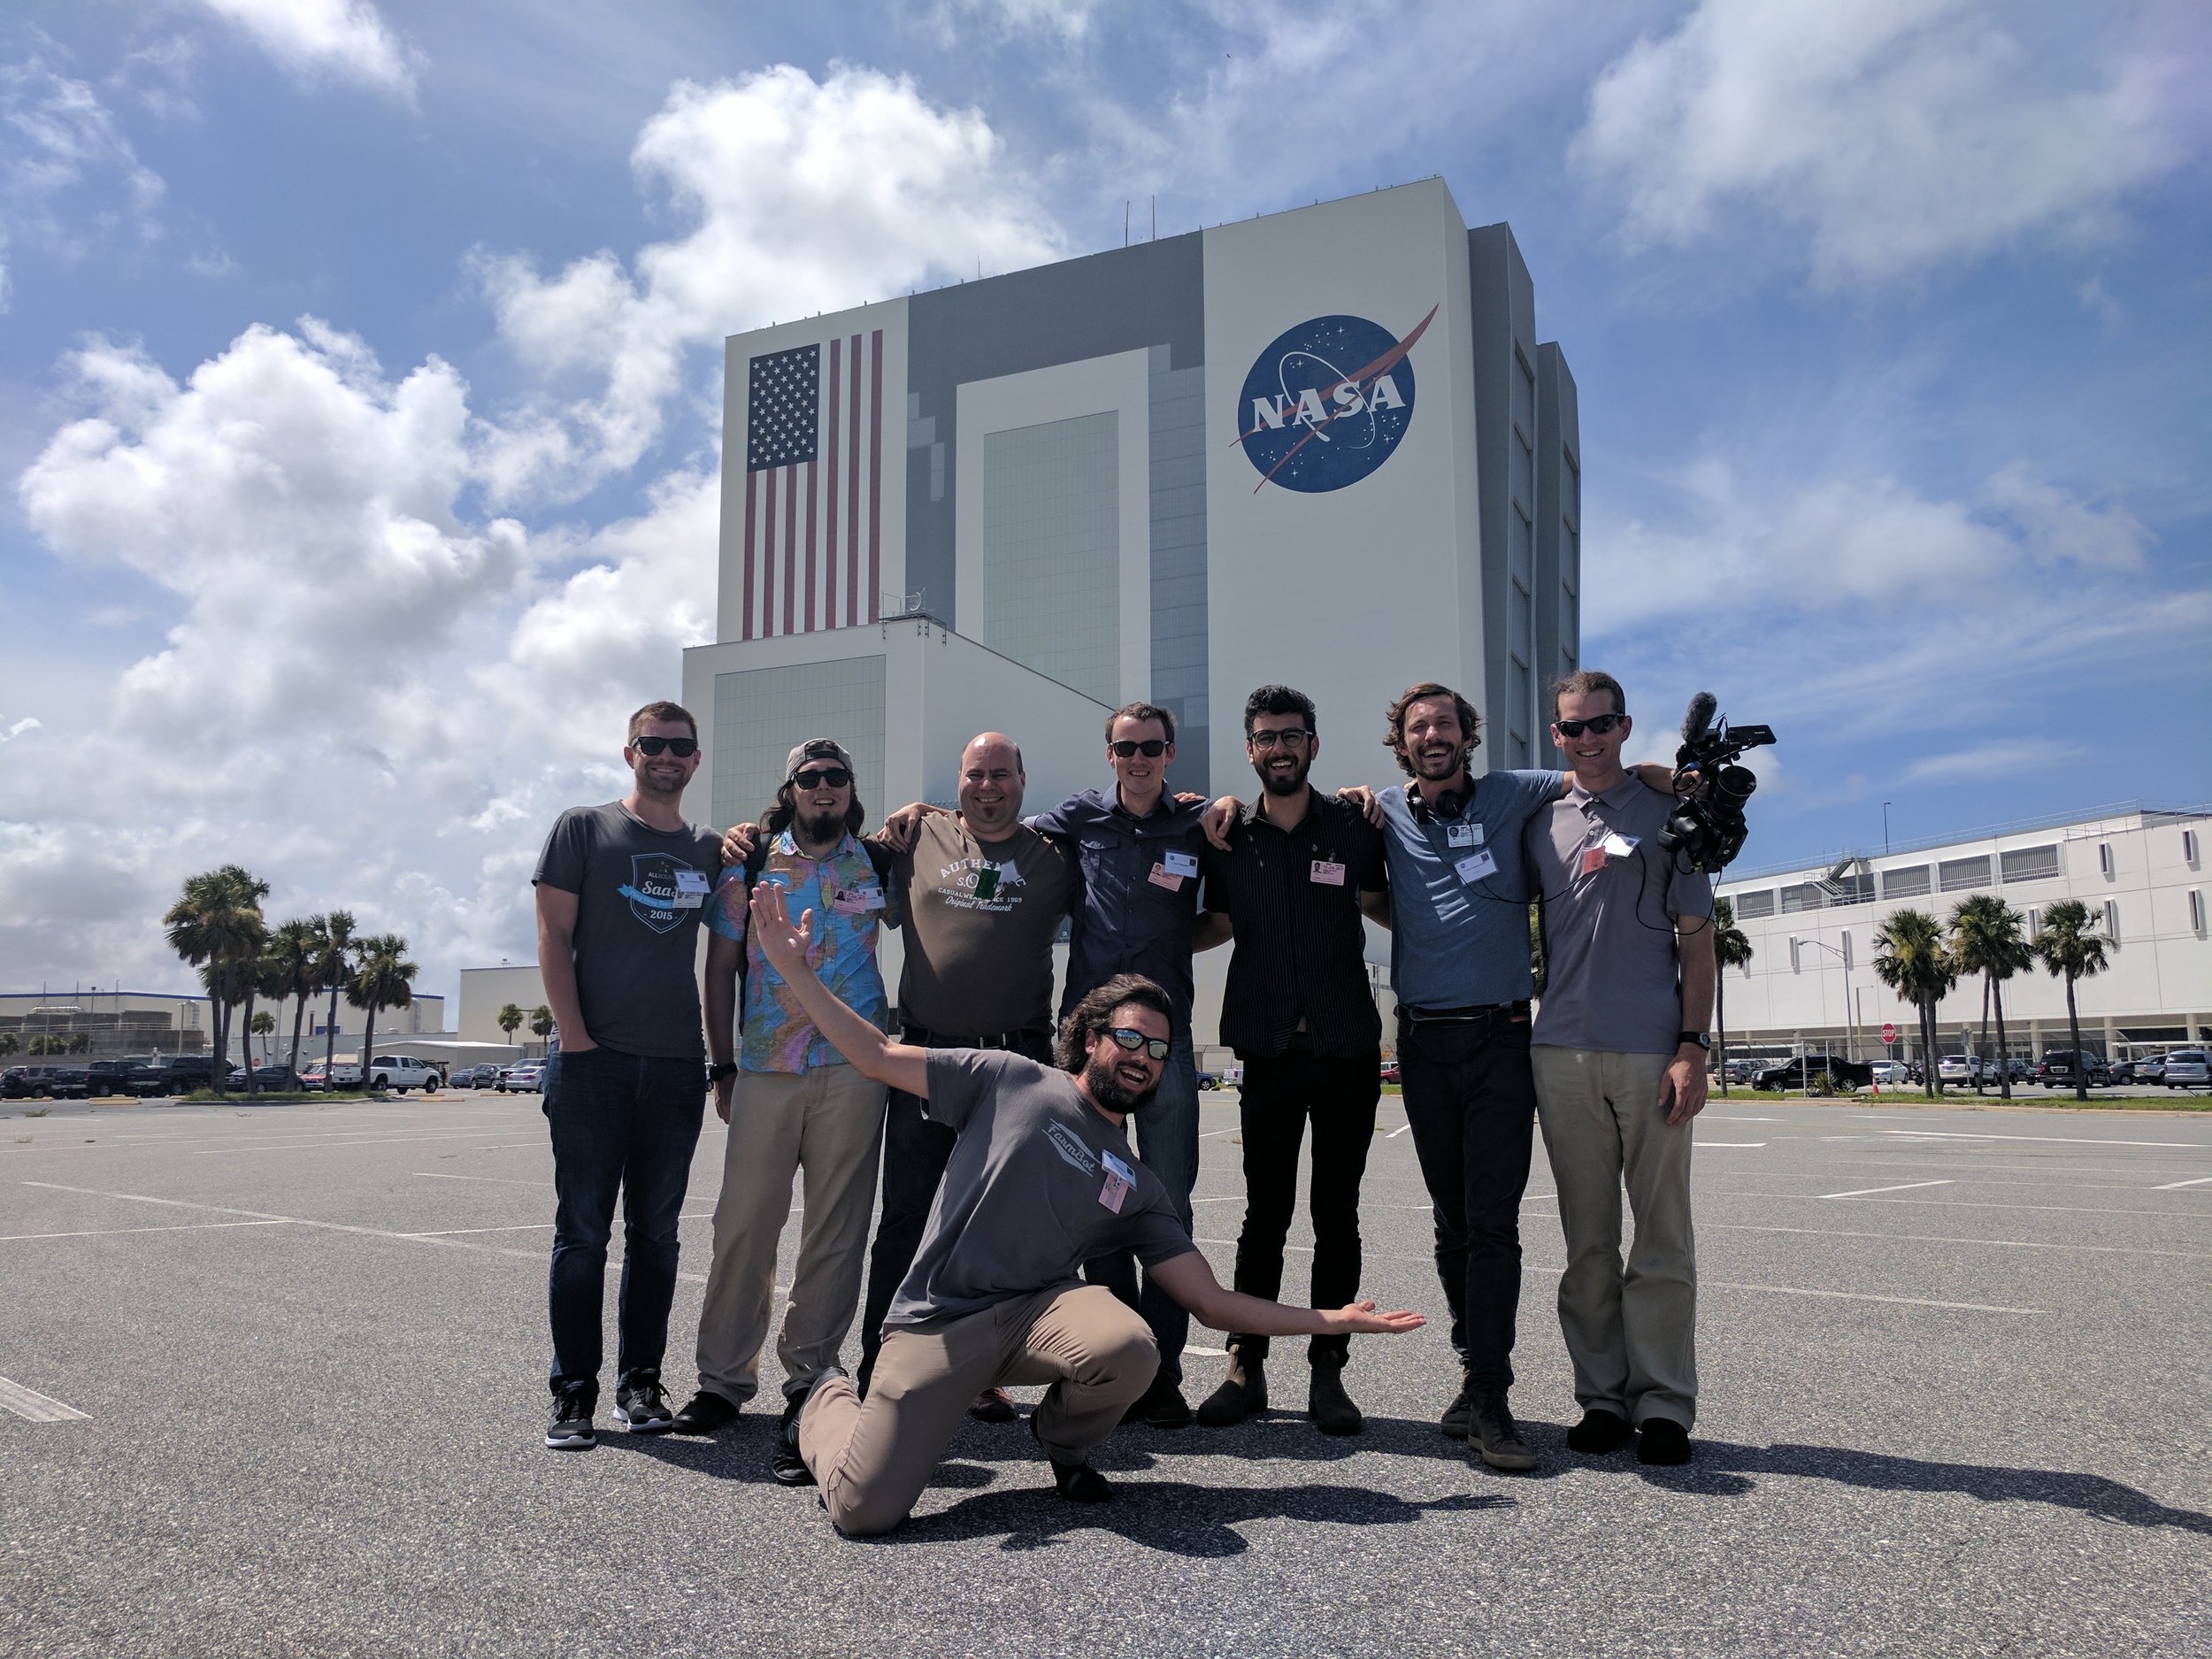  Openfarm/Farmbot team attends a conference at NASA 